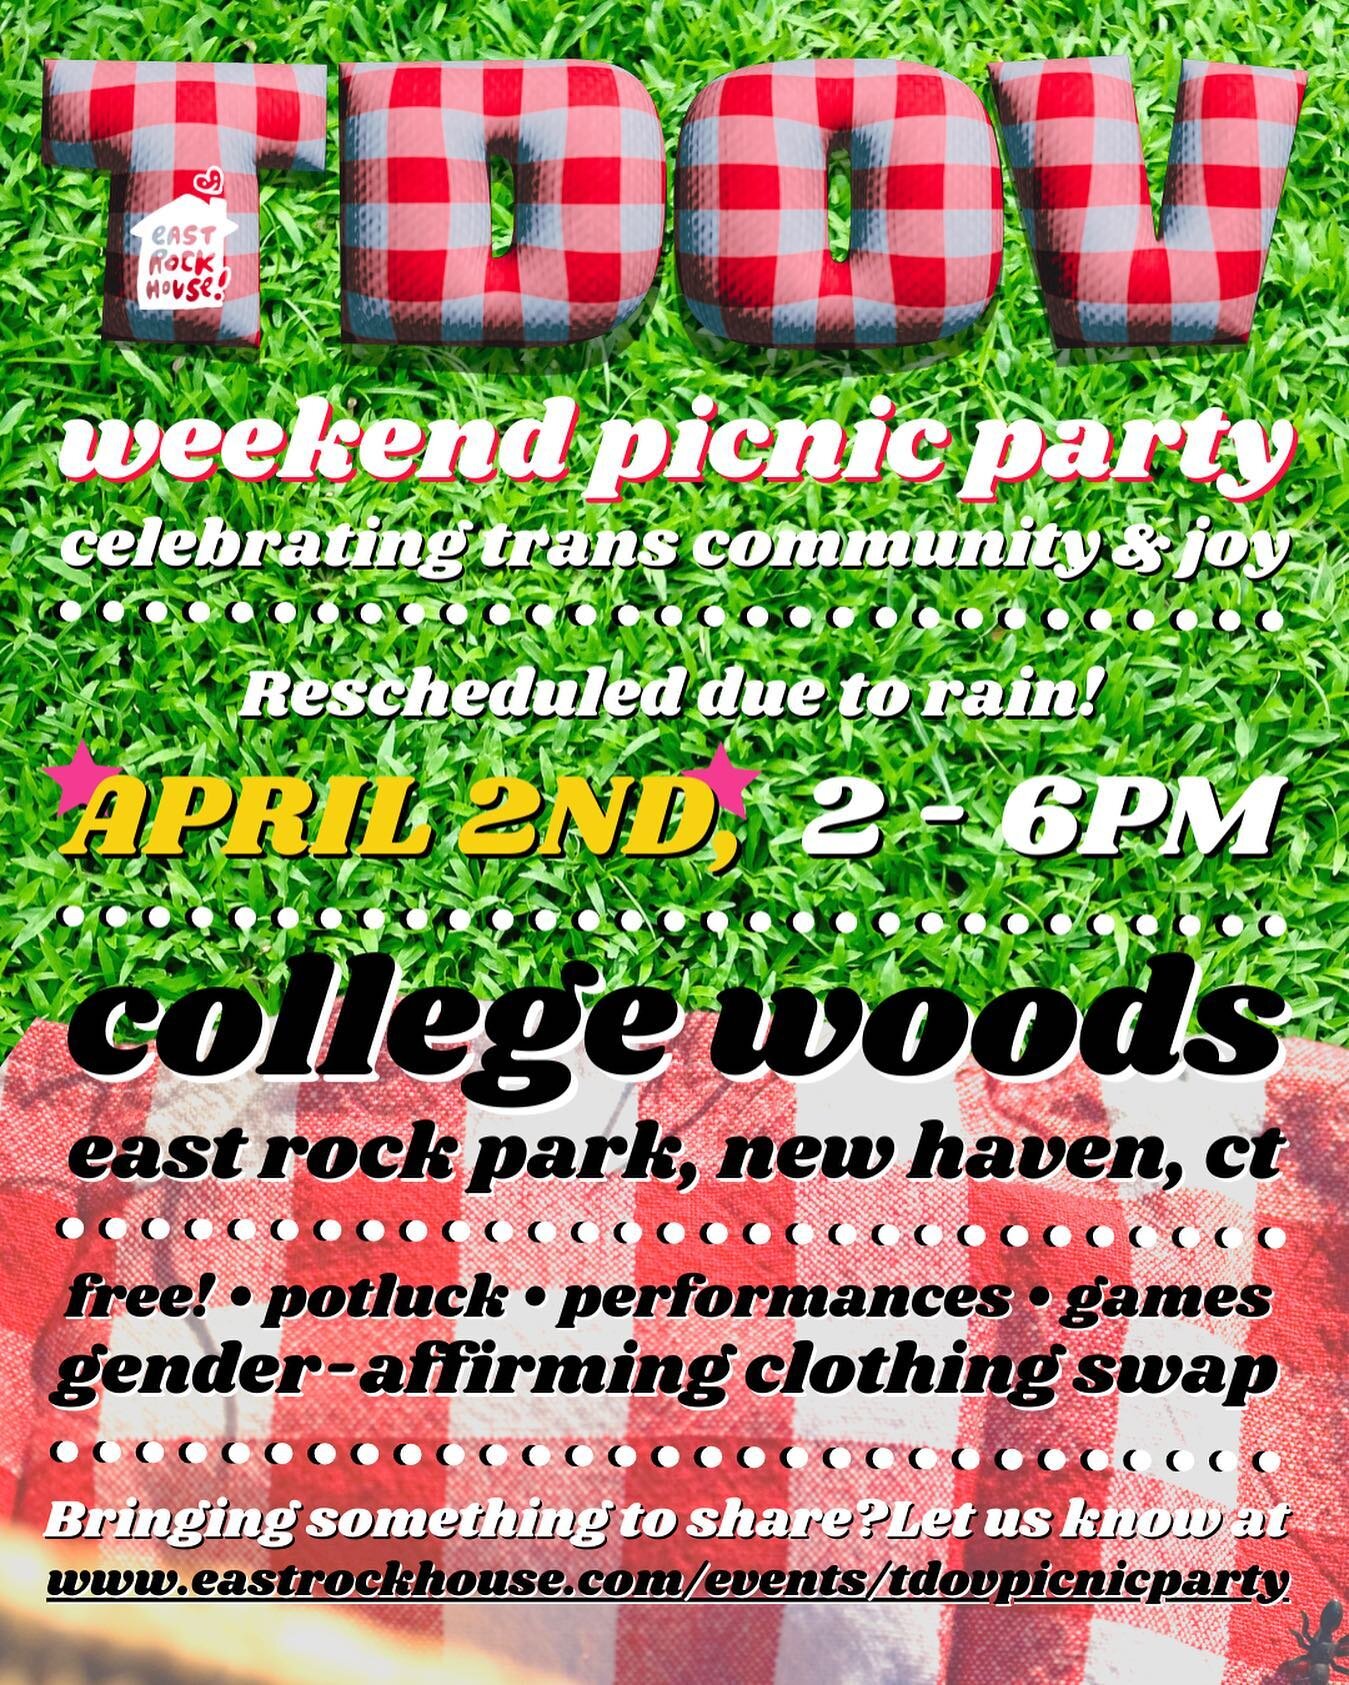 We&rsquo;re activating our rain date! It&rsquo;s supposed to rain tomorrow so TDOV Weekend Picnic Party will take place on Sunday, April 2nd from 2-6pm! Don&rsquo;t forget to let us know what you&rsquo;re bringing! Link in bio! &bull; #nhv #nhvarts